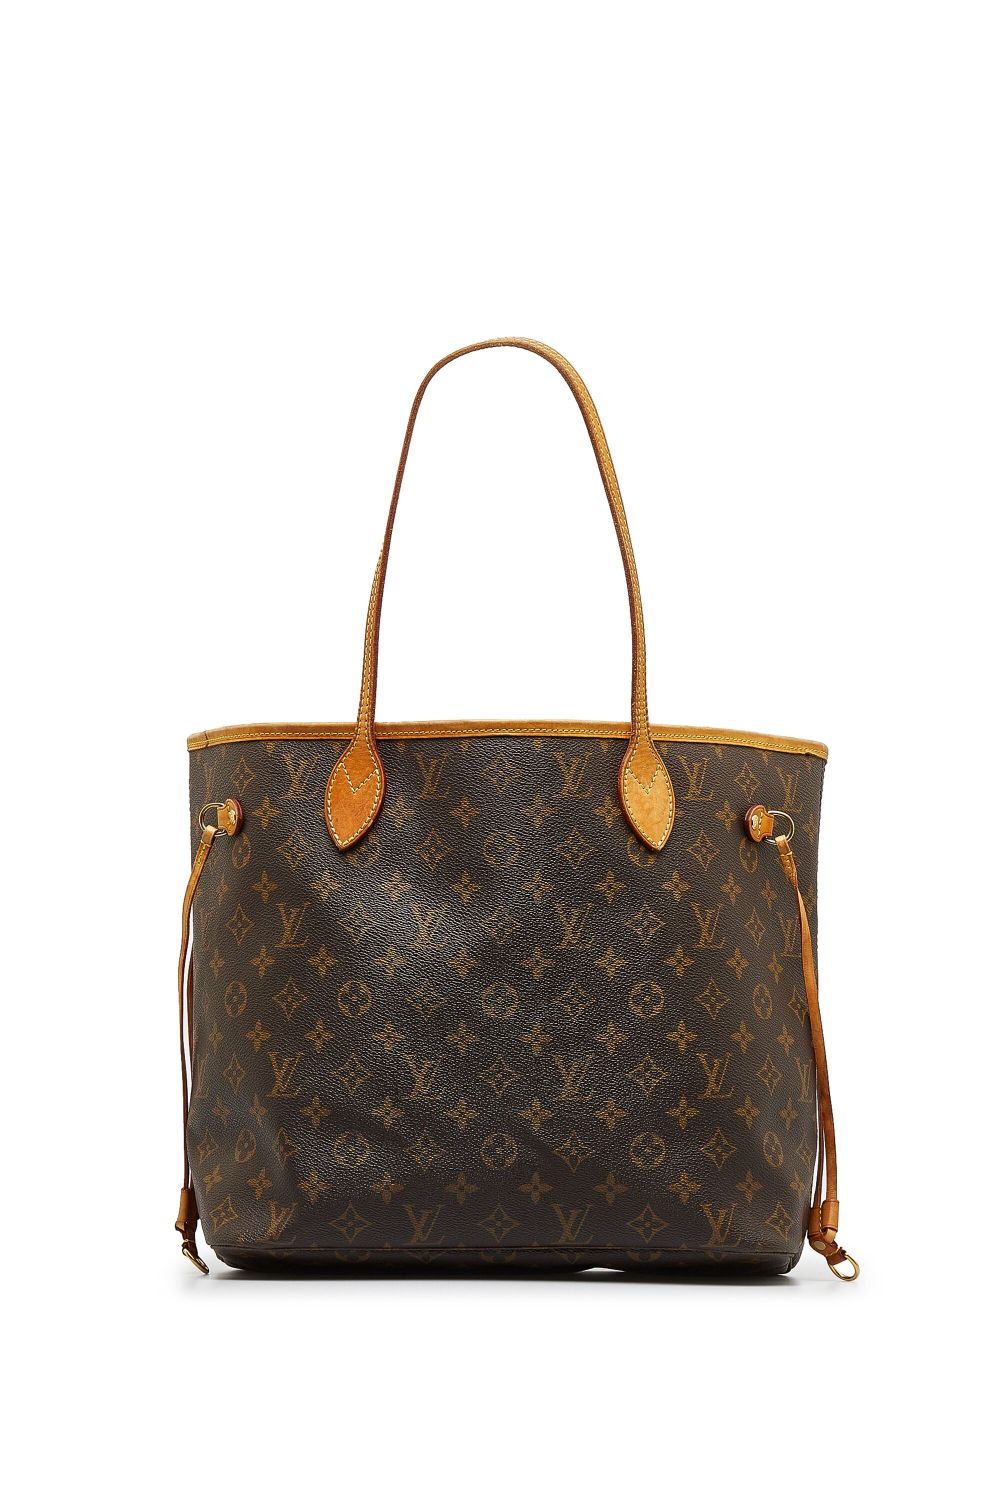 Image 1 of Louis Vuitton Pre-Owned 2009 Monogram Neverfull MM tote bag